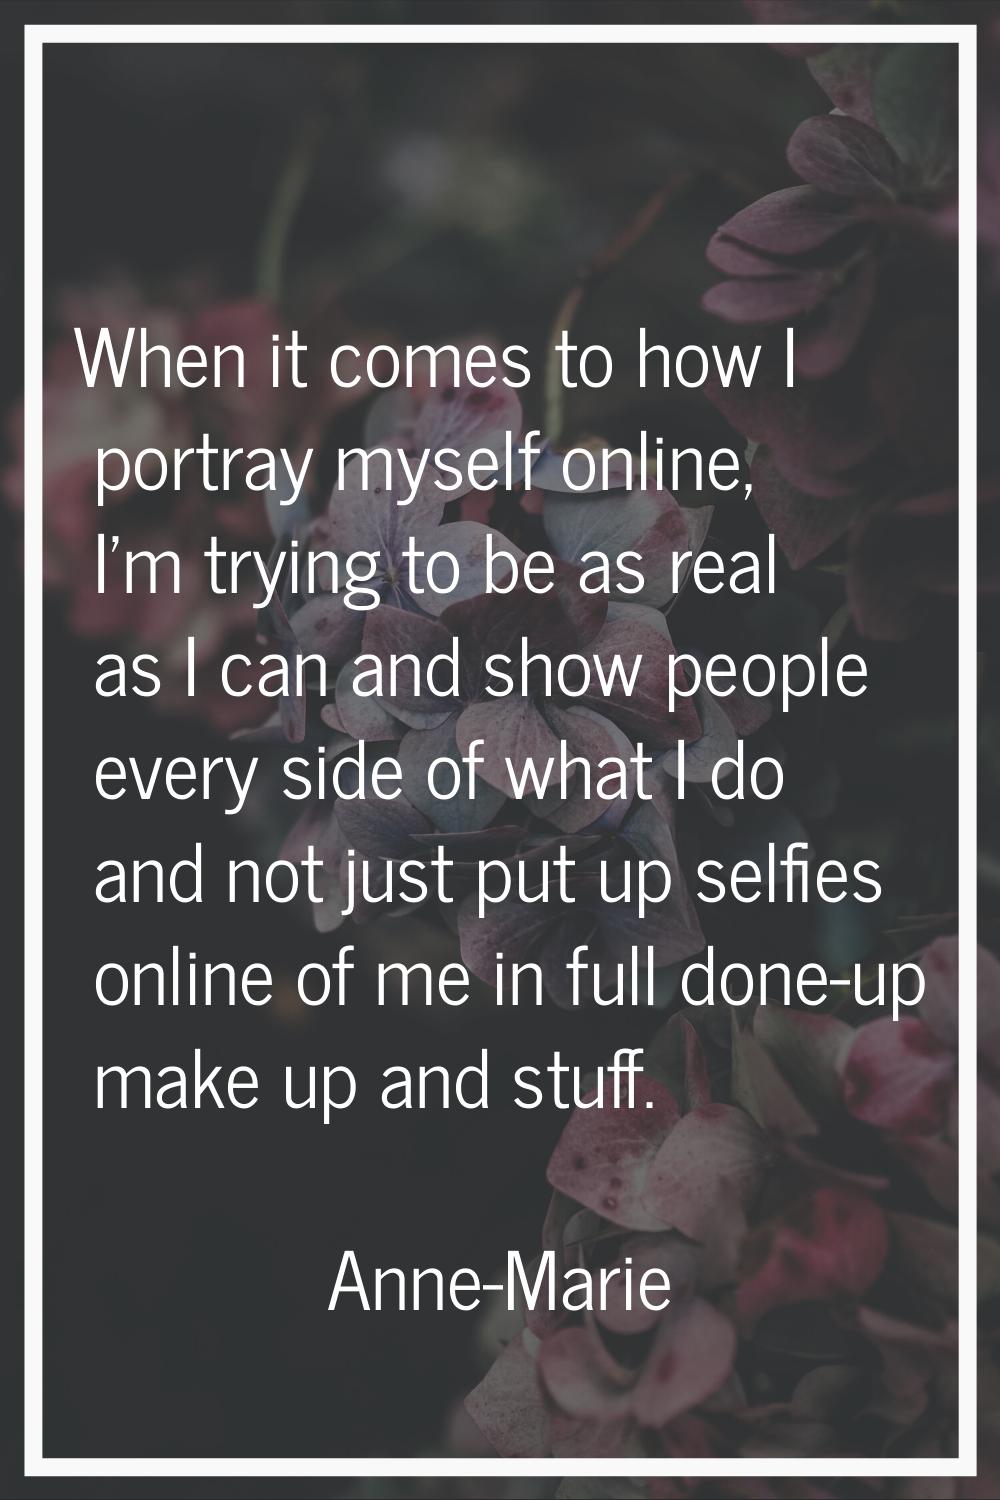 When it comes to how I portray myself online, I'm trying to be as real as I can and show people eve